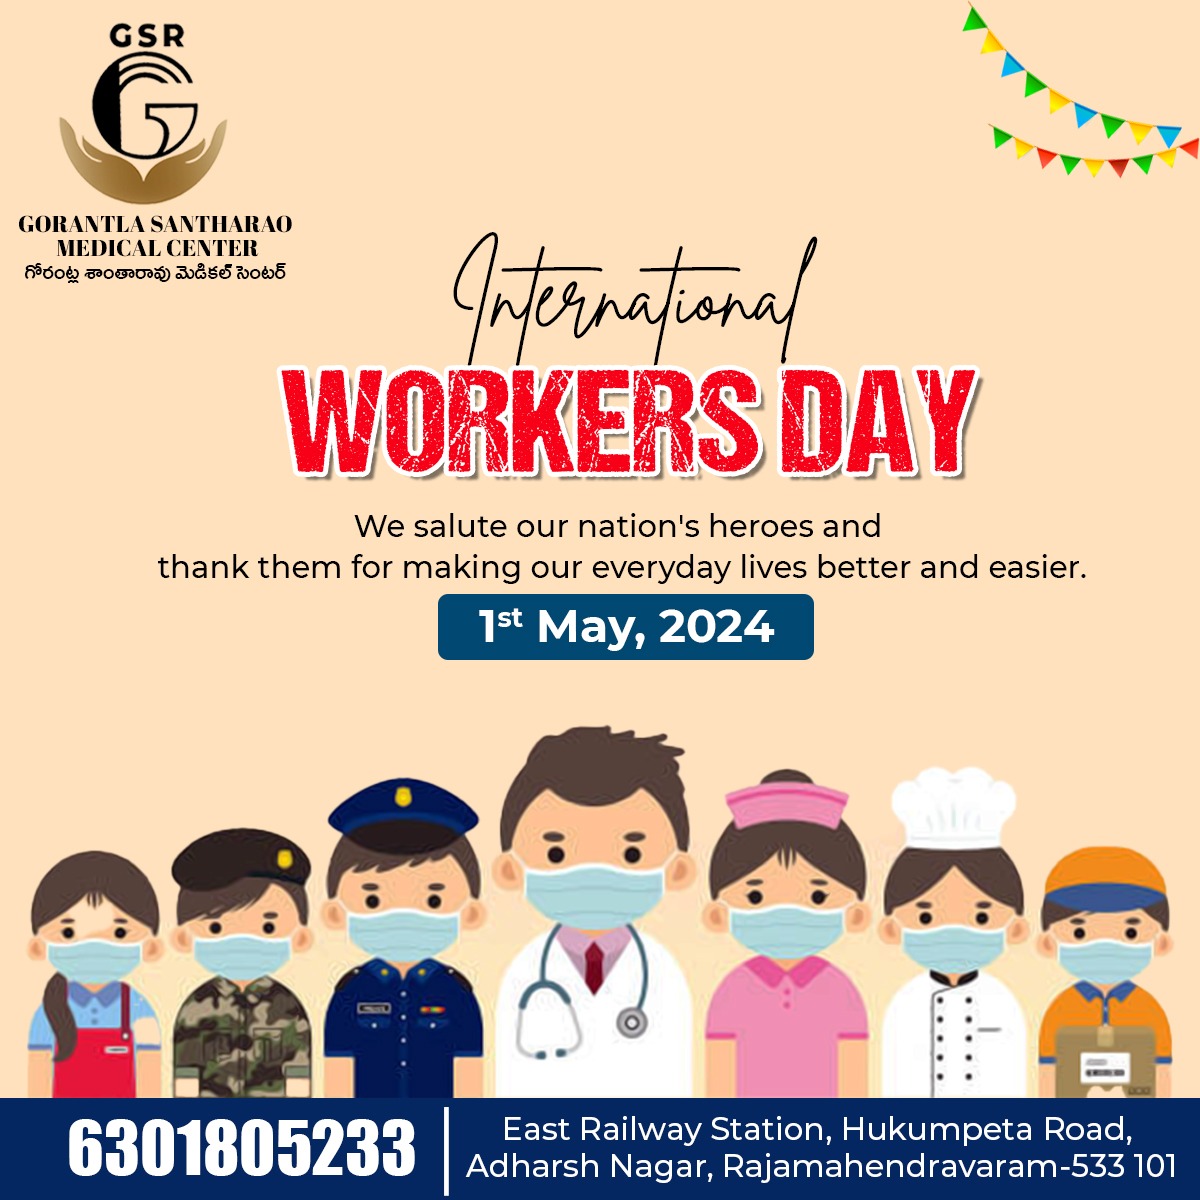 'Happy International Labour Day! Let's honour the relentless workers who power our world and uplift our lives. Today, we celebrate your dedication and resilience!'
#gsrmedicalcenter #celebrates #MayDay #WorkersDay #InternationalWorkersDay #LaborDay #MayDay2024 #Rajahmundry